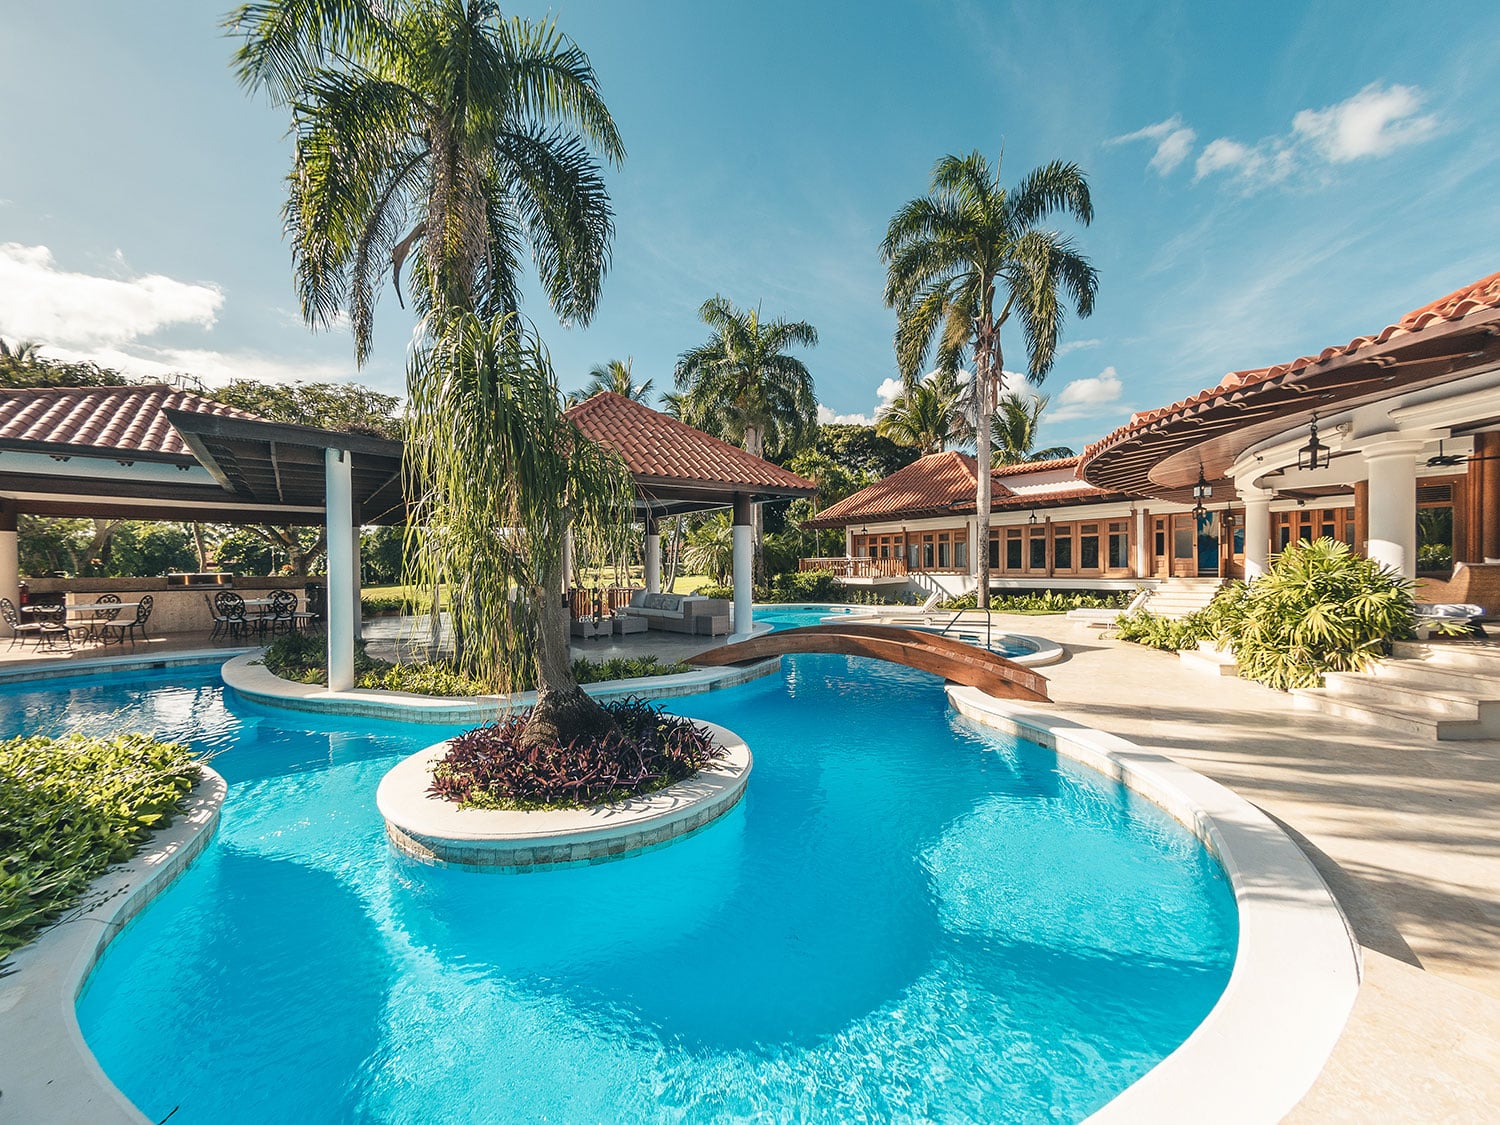 A view of the pool at the luxurious Maison Larimar villa at Casa de Campo in the Dominican Republic.